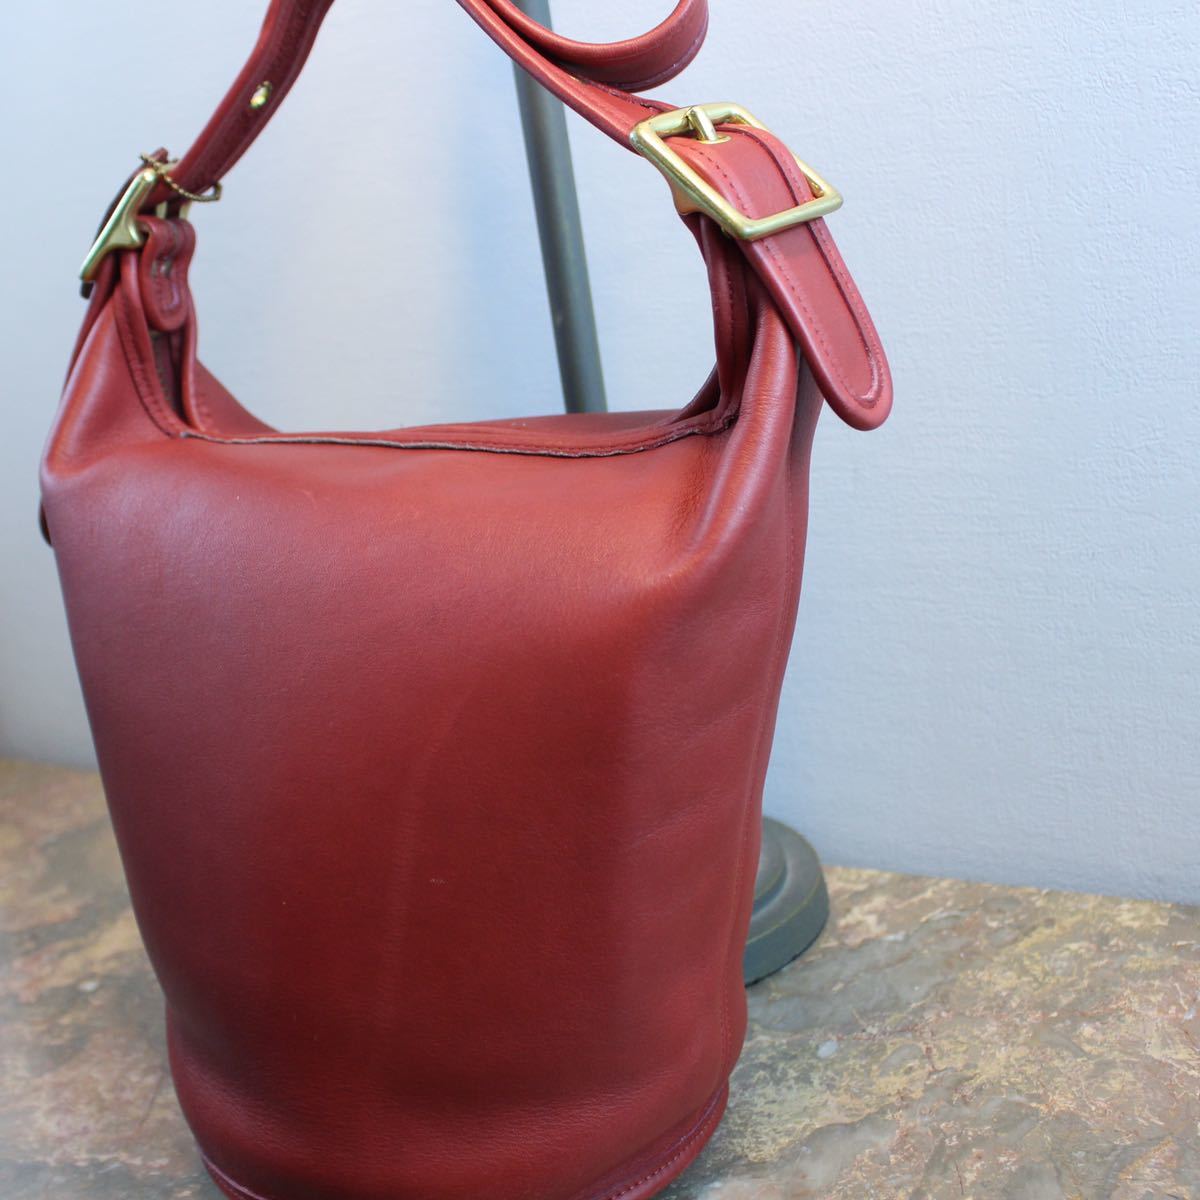 OLD COACH BACKET TYPE LEATHER SHOULDER BAG MADE IN USA/オールドコーチバケツ型レザーショルダーバッグ